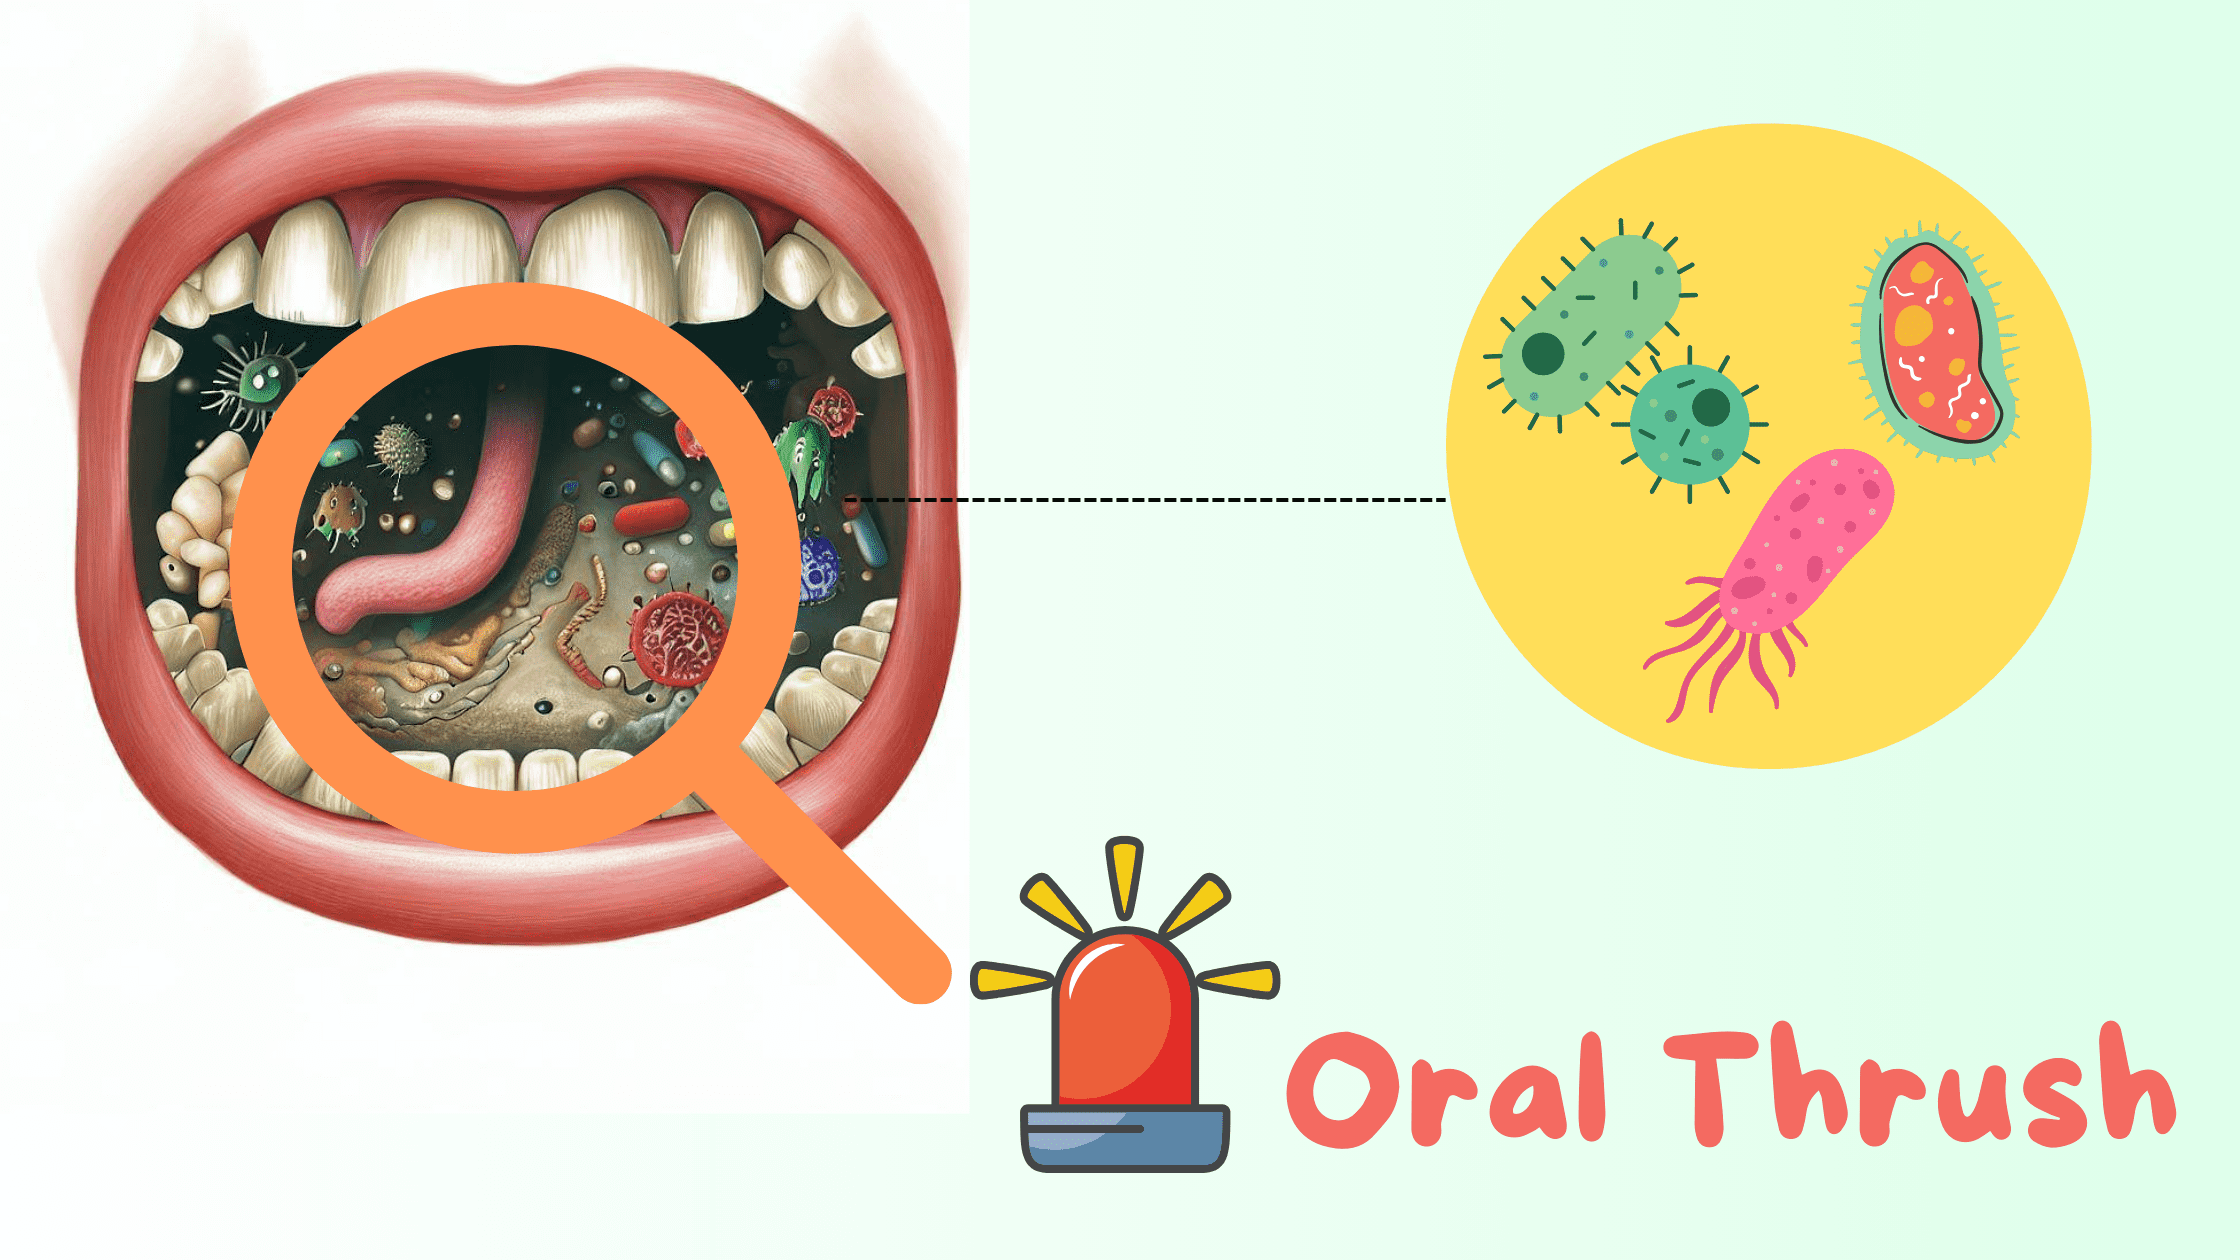 Oral Thrush: A Common Fungal Infection of the Mouth